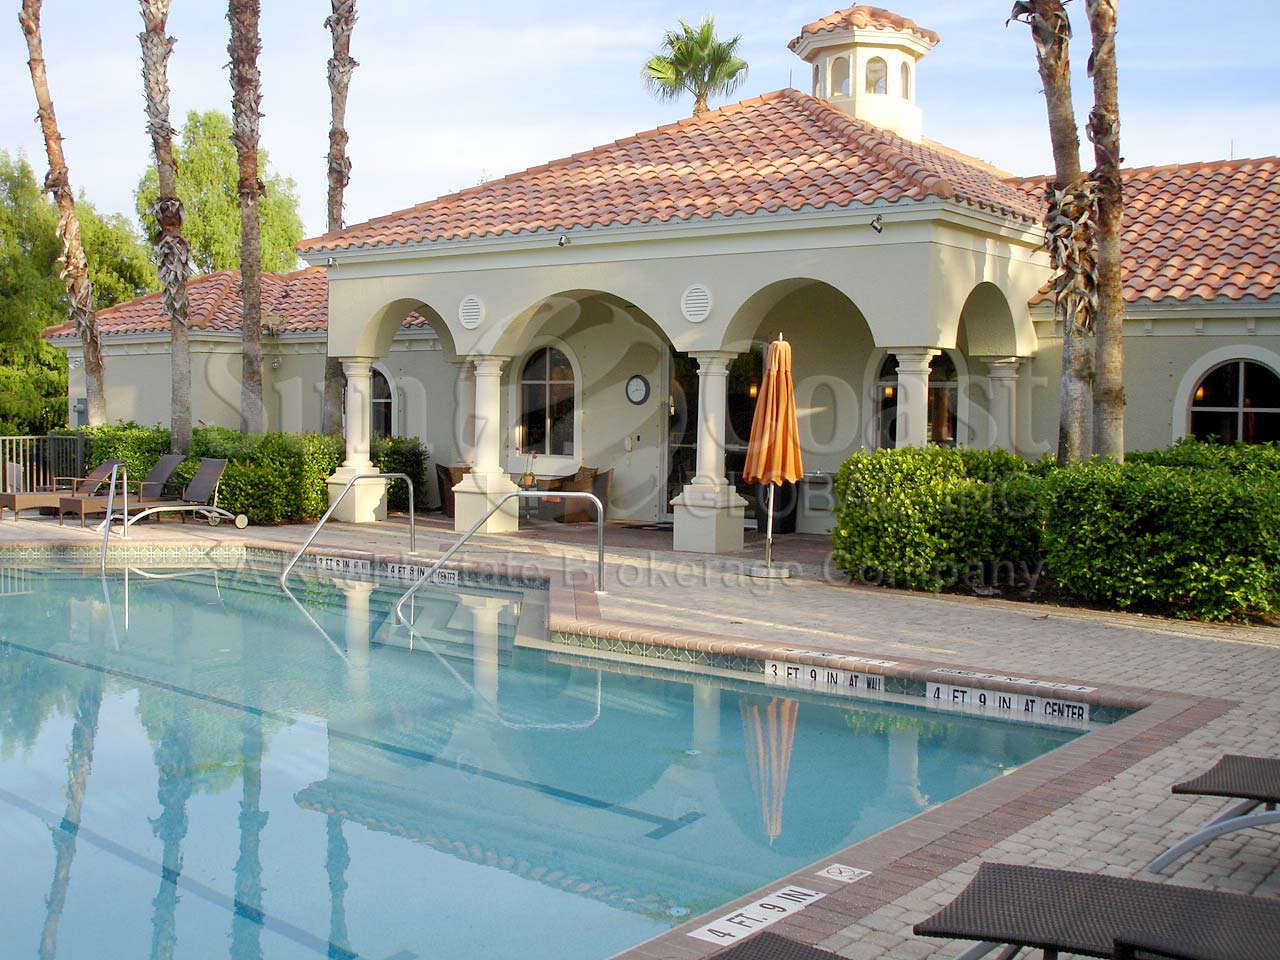 OLDE CYPRESS Fitness Facilities and Community Pool